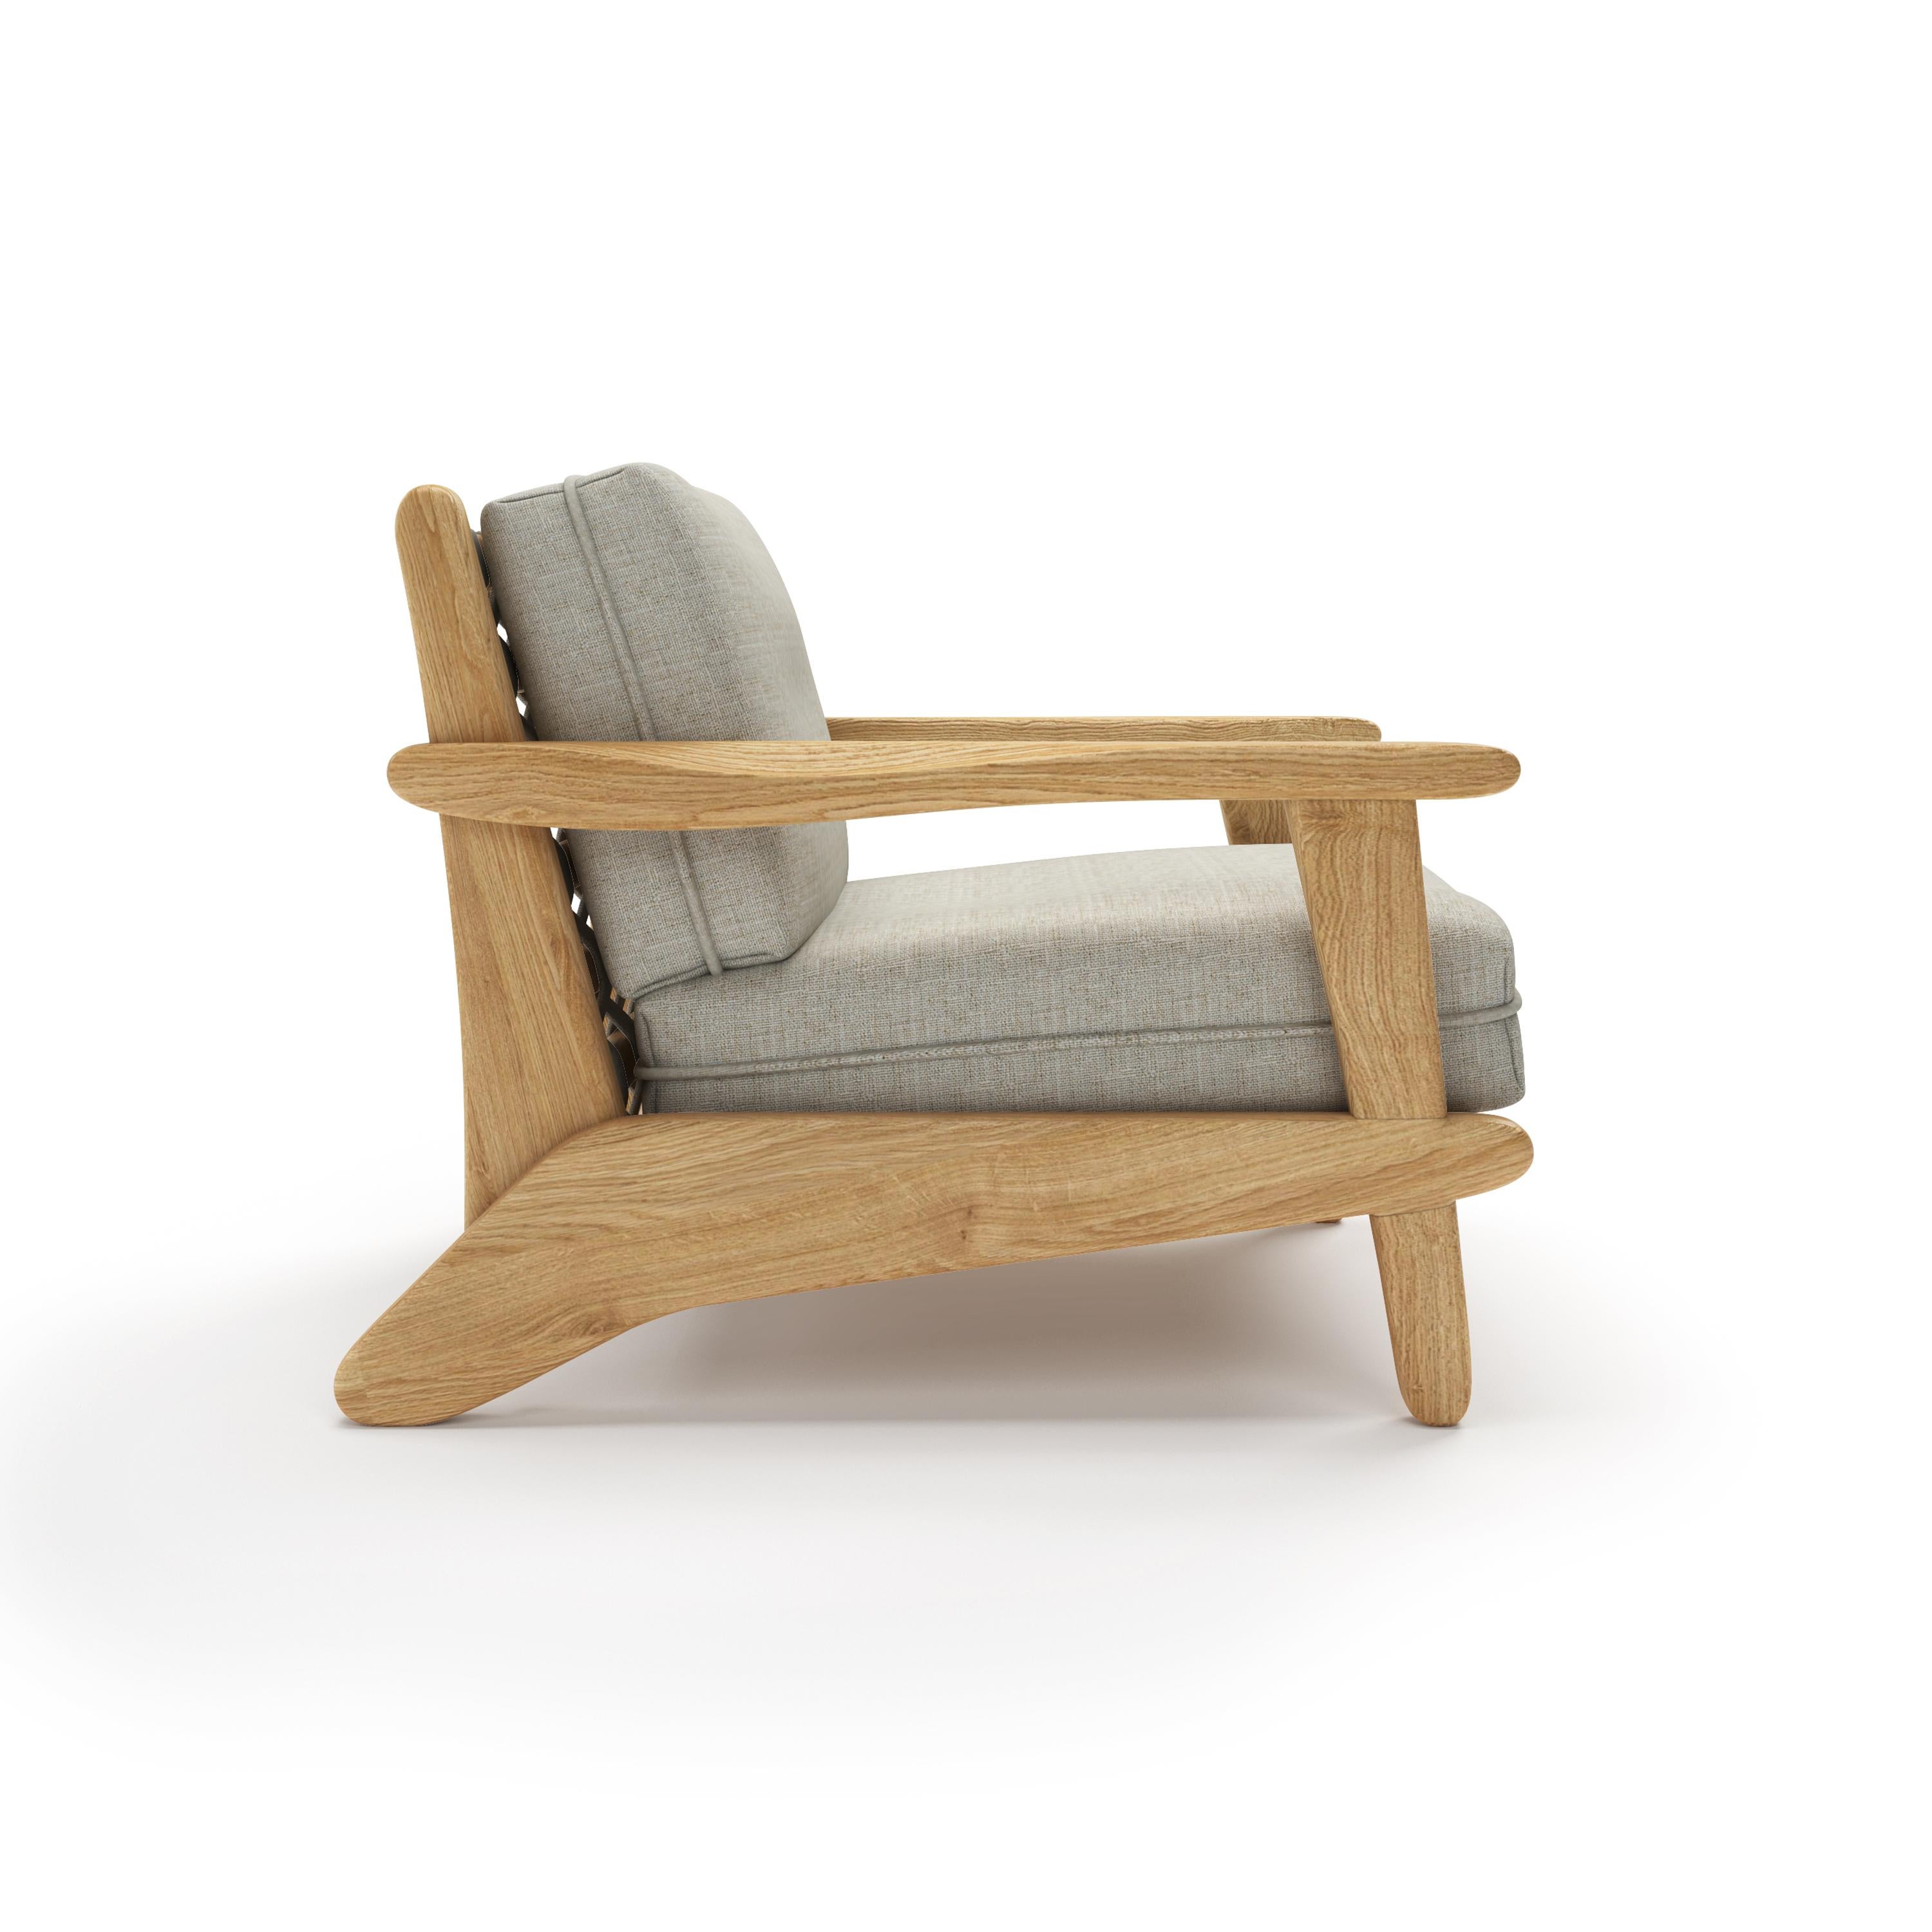 Invite summer vibes in with this beautiful Suave Arm Chair! Crafted from breathy oak wood with soft, organic edges, it brings a warm and inviting feel to any room. Enjoy lasting comfort and style with this timeless piece!

All Tektōn pieces are made